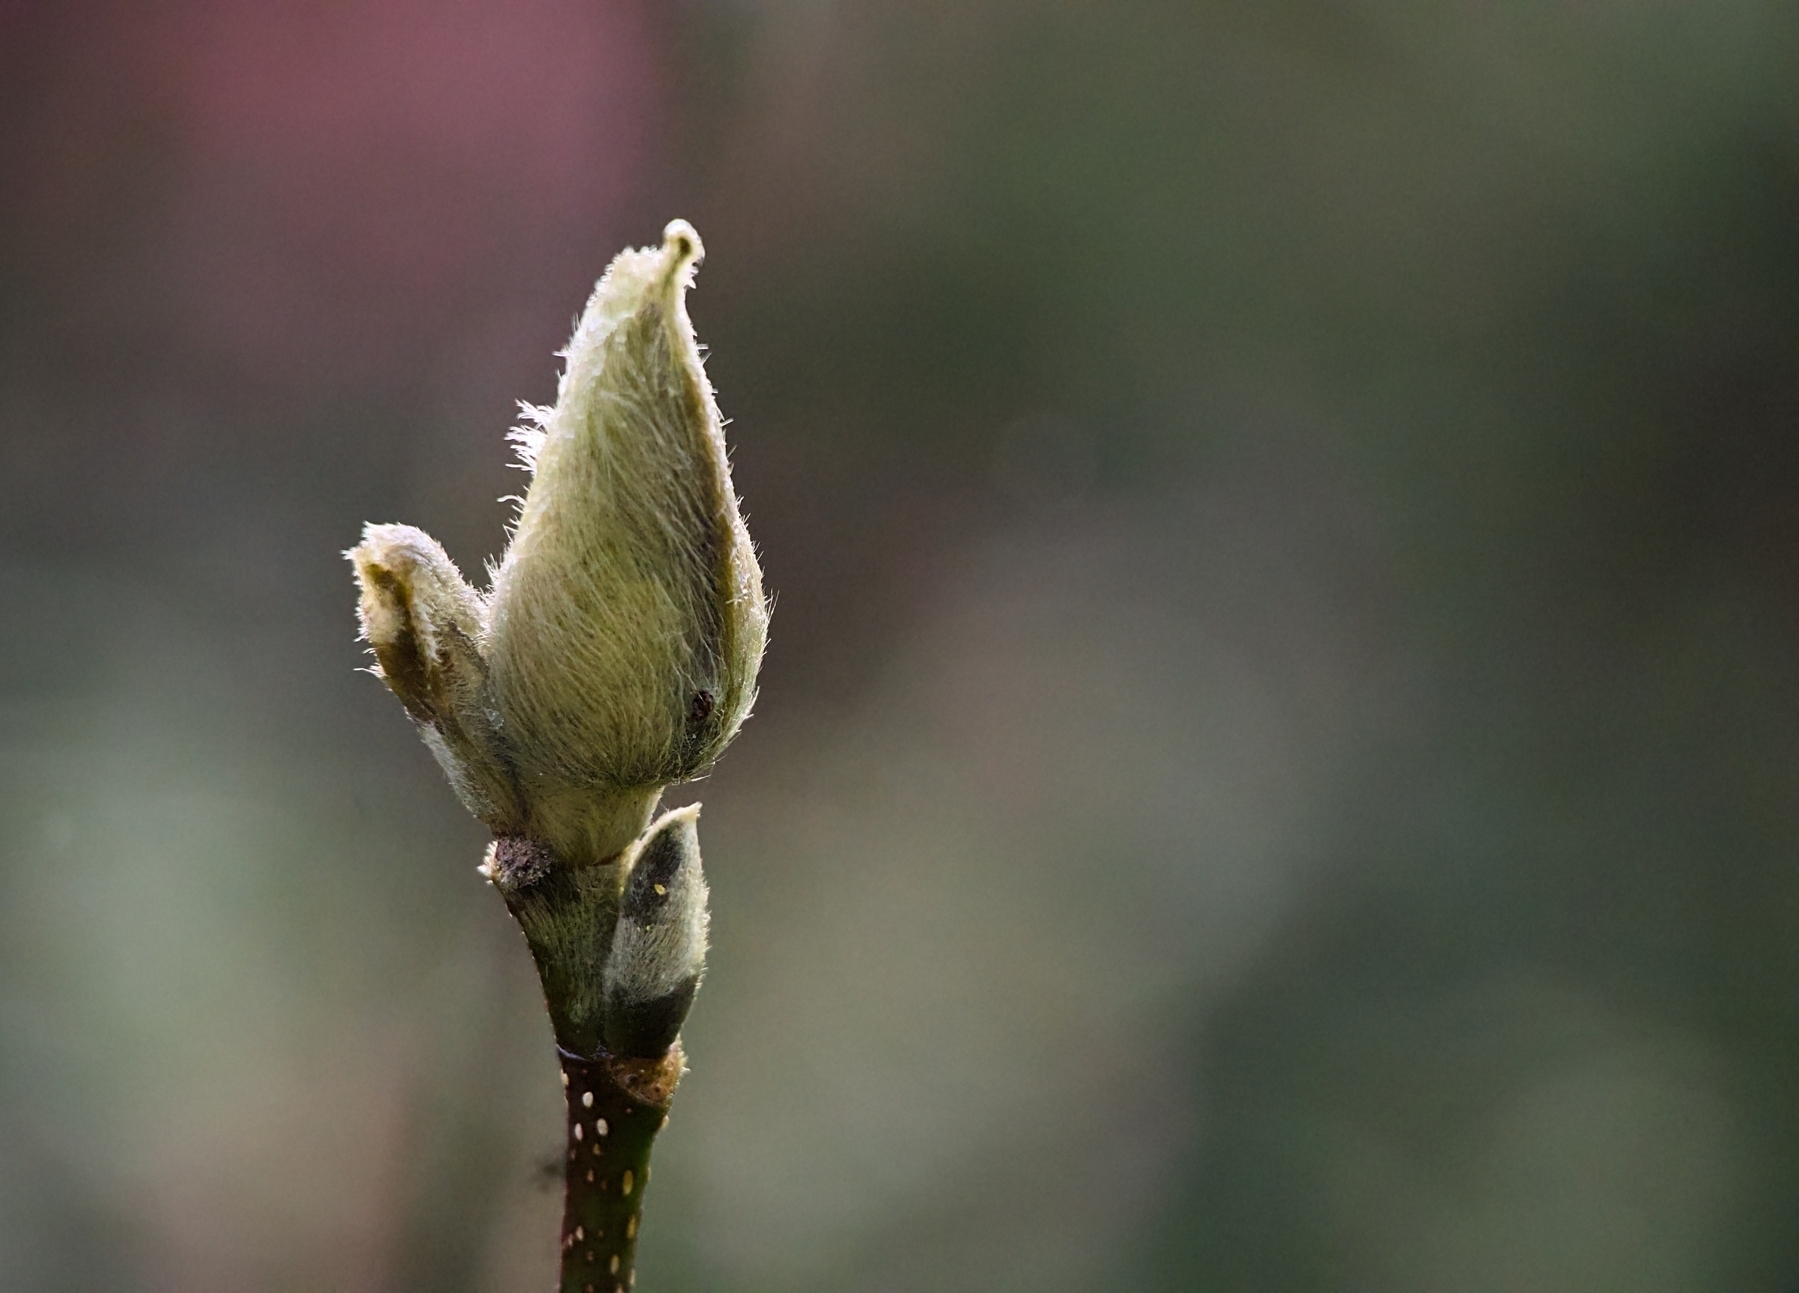 A bud forming at Nymans in Sussex. 